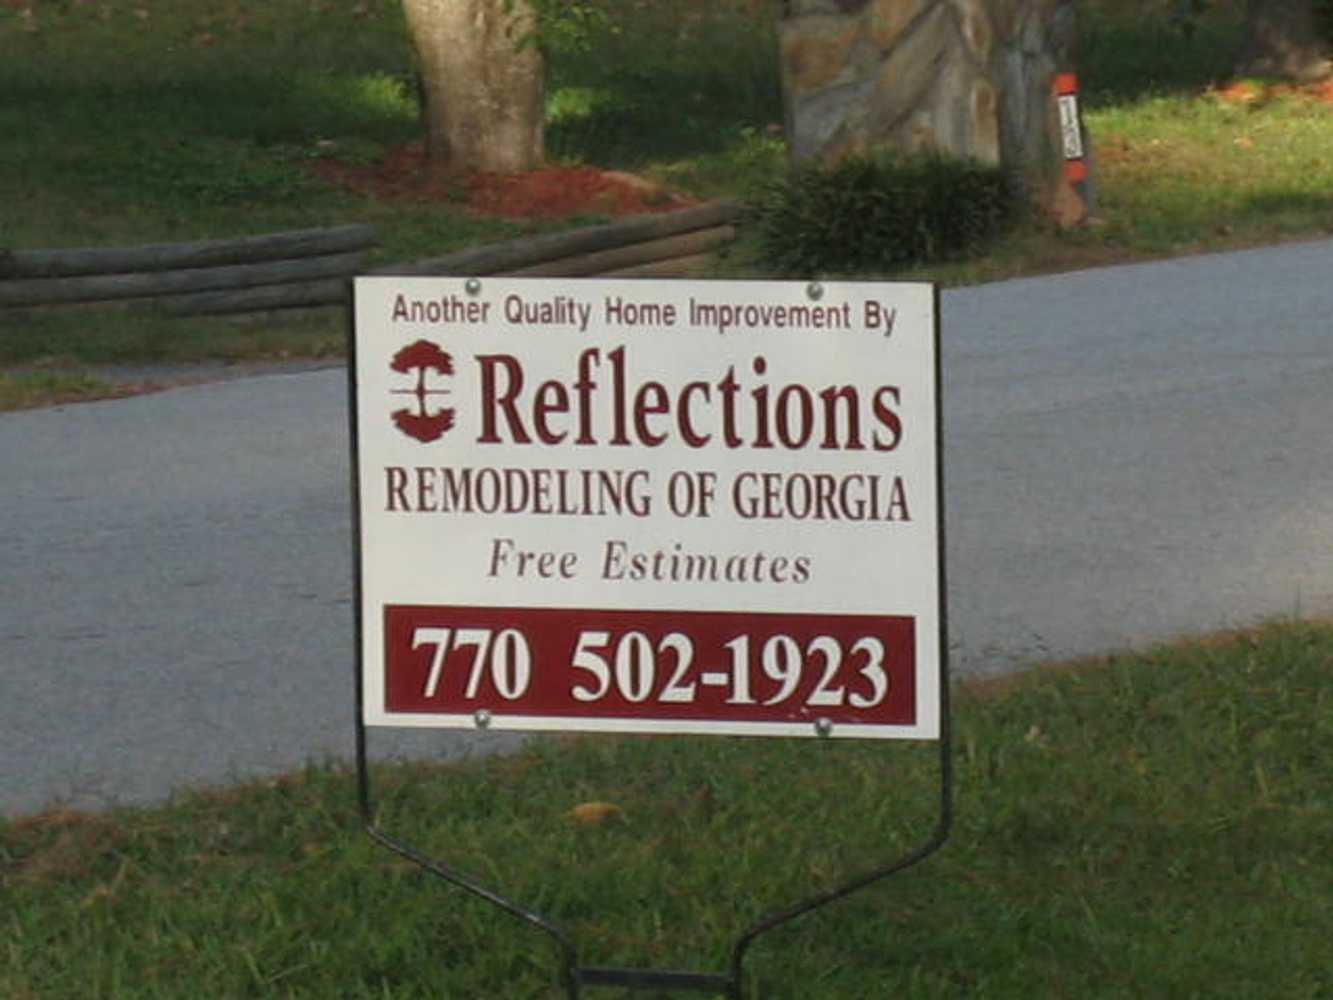 Project photos from Reflections Remodeling Of Georgia Inc